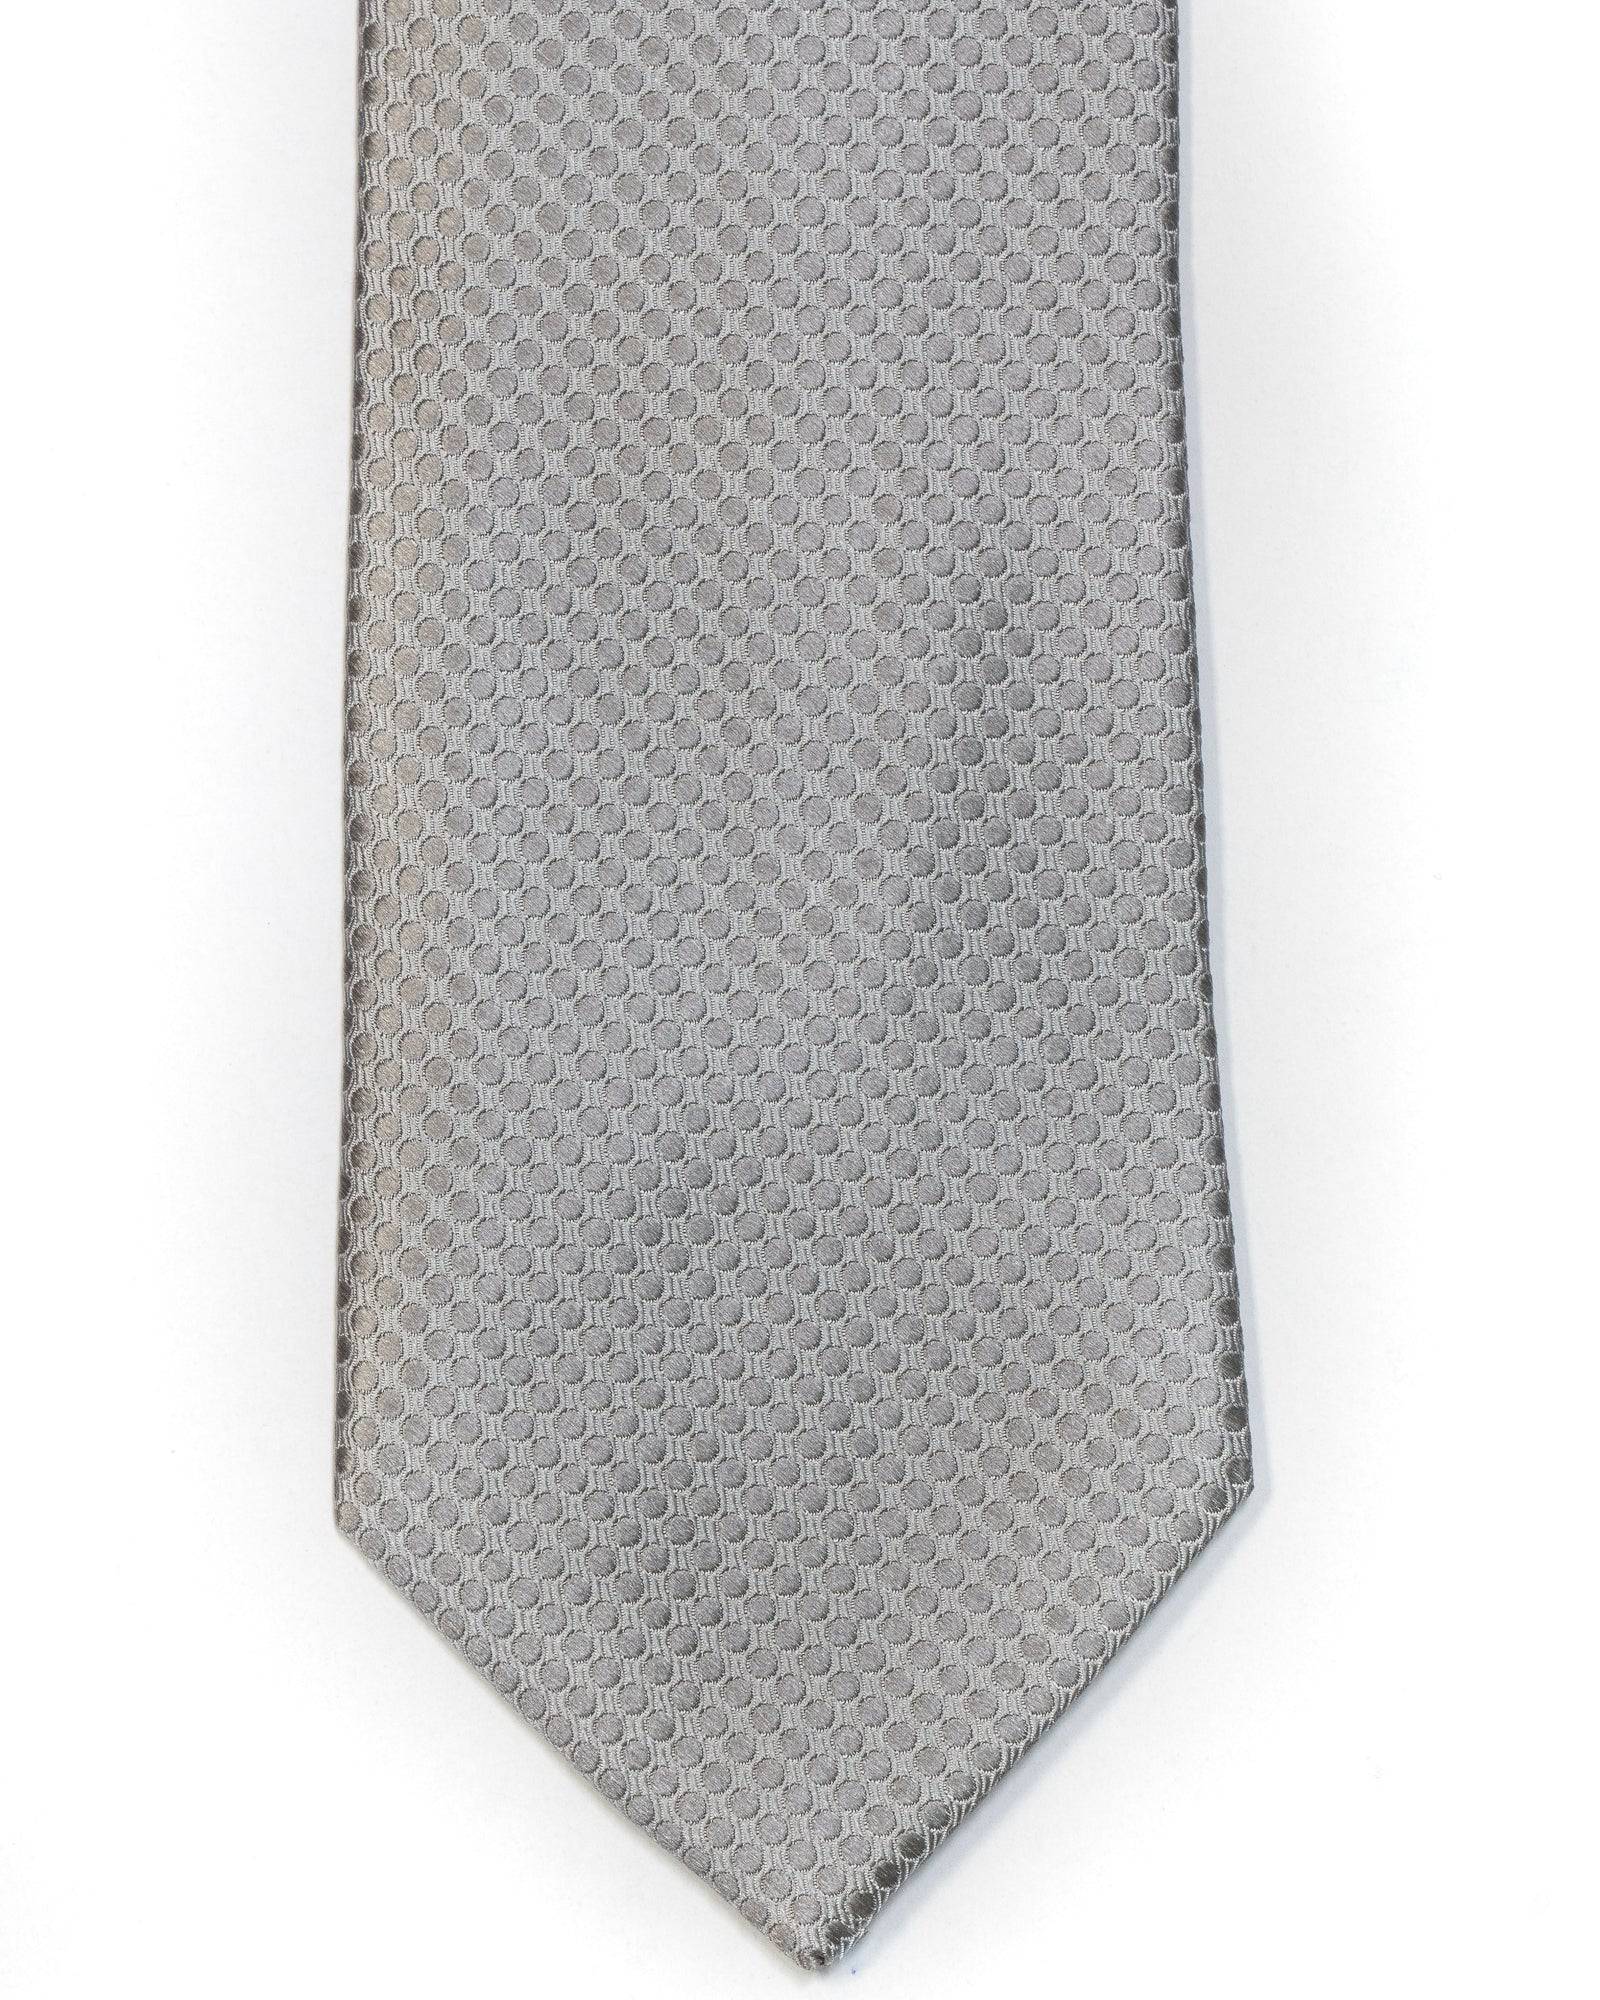 Silk Tie In Silver Circle Jacquard Design Solid - Rainwater's Men's Clothing and Tuxedo Rental